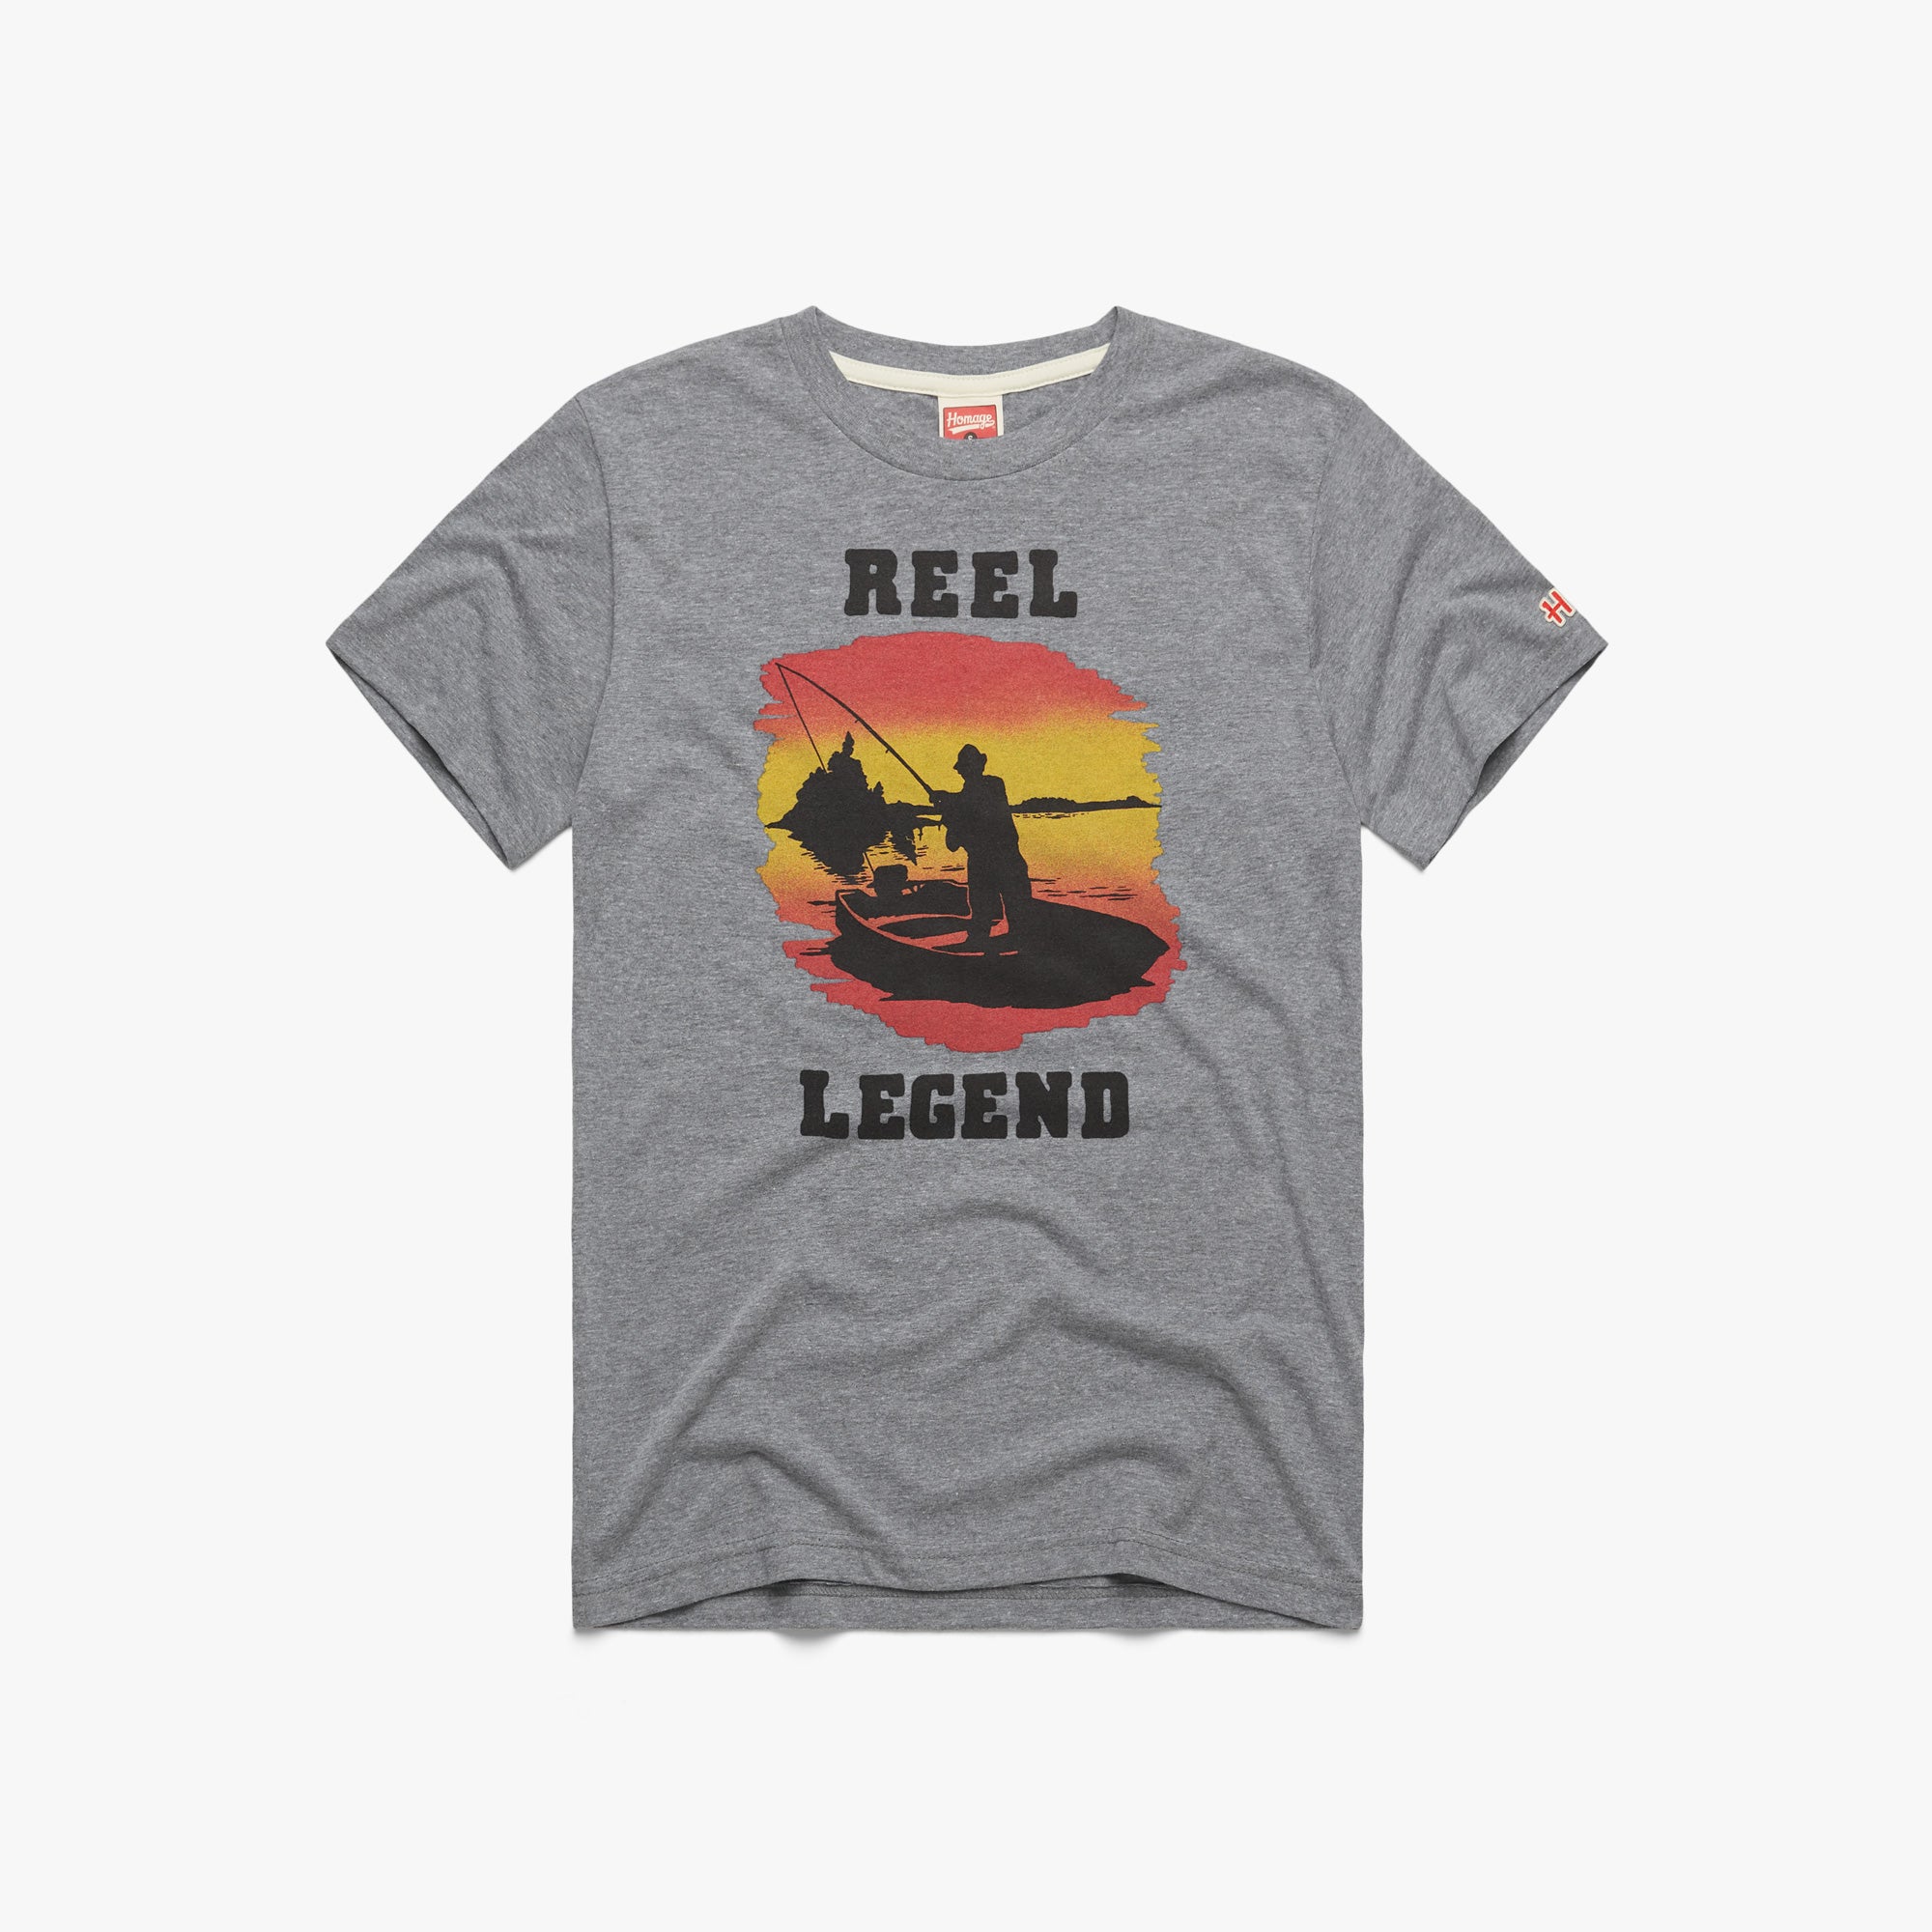 Reel Legend T-Shirt from Homage. | Grey | Vintage Apparel from Homage.